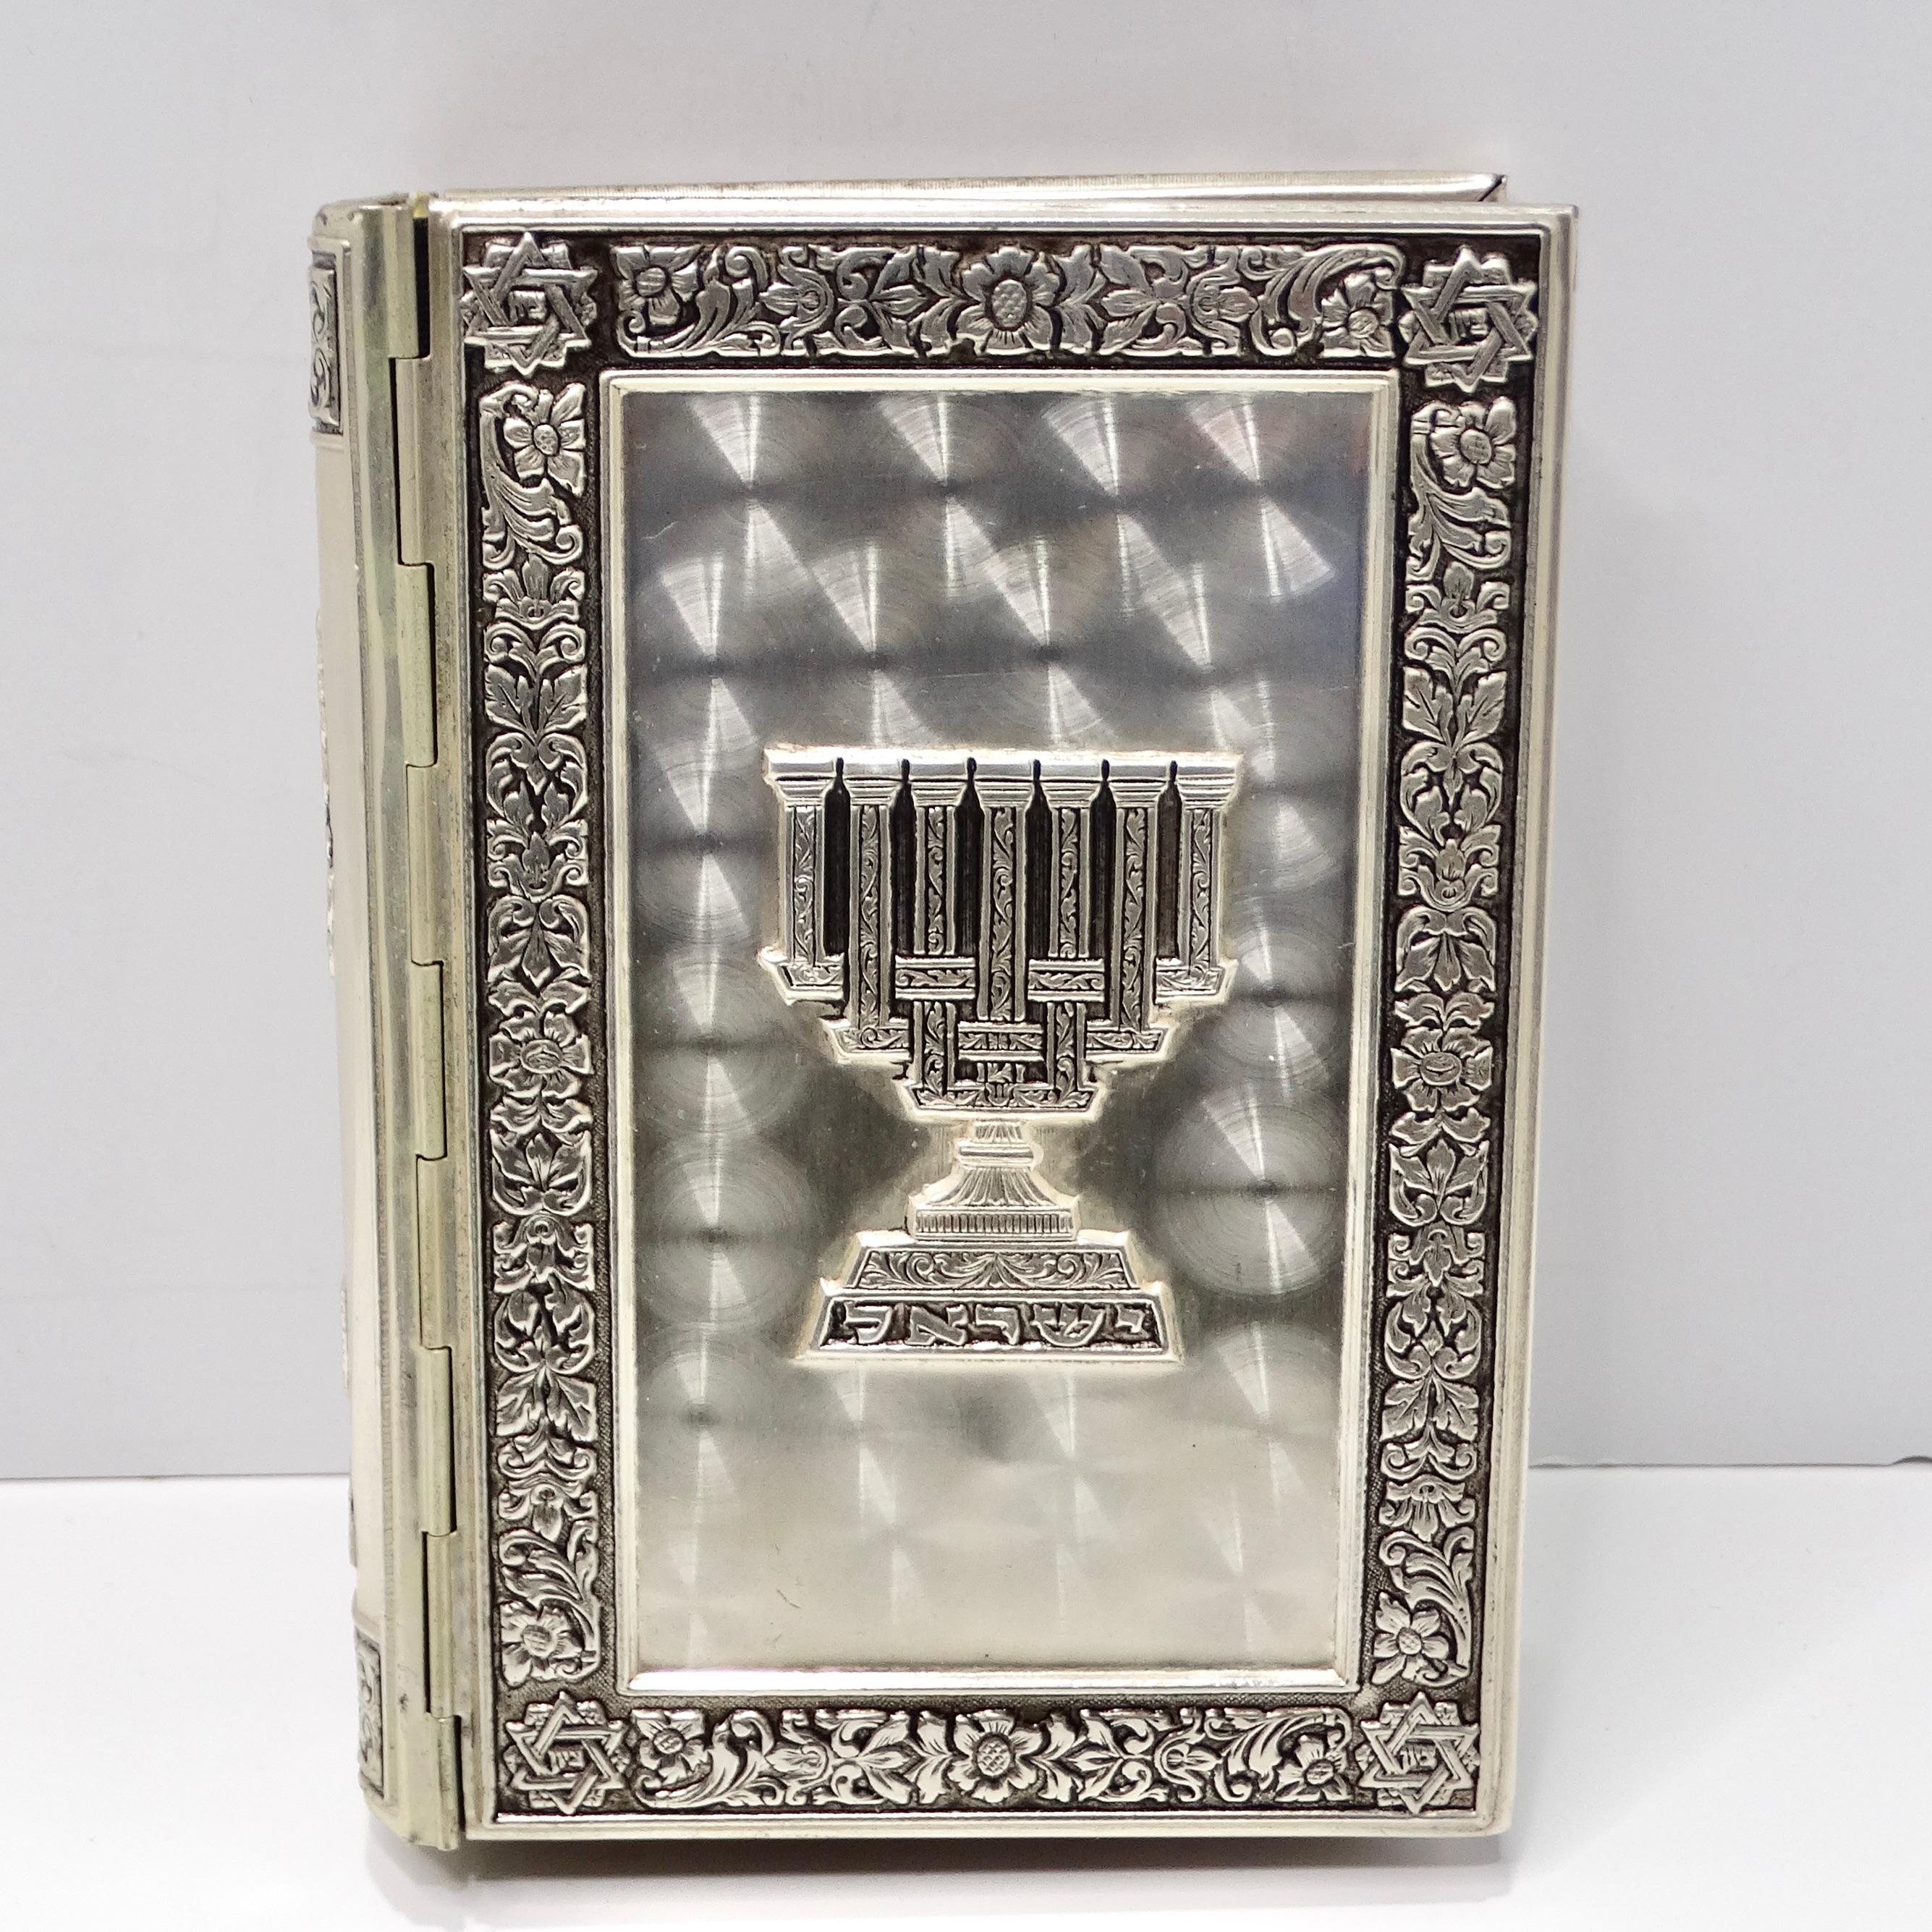 Introducing the exquisite 1964 Gem Encrusted Jewish Torah,a stunning testament to craftsmanship and devotion. This silver-plated Hebrew prayer book is adorned with intricate engravings that depict a rich tapestry of Jewish symbolism and